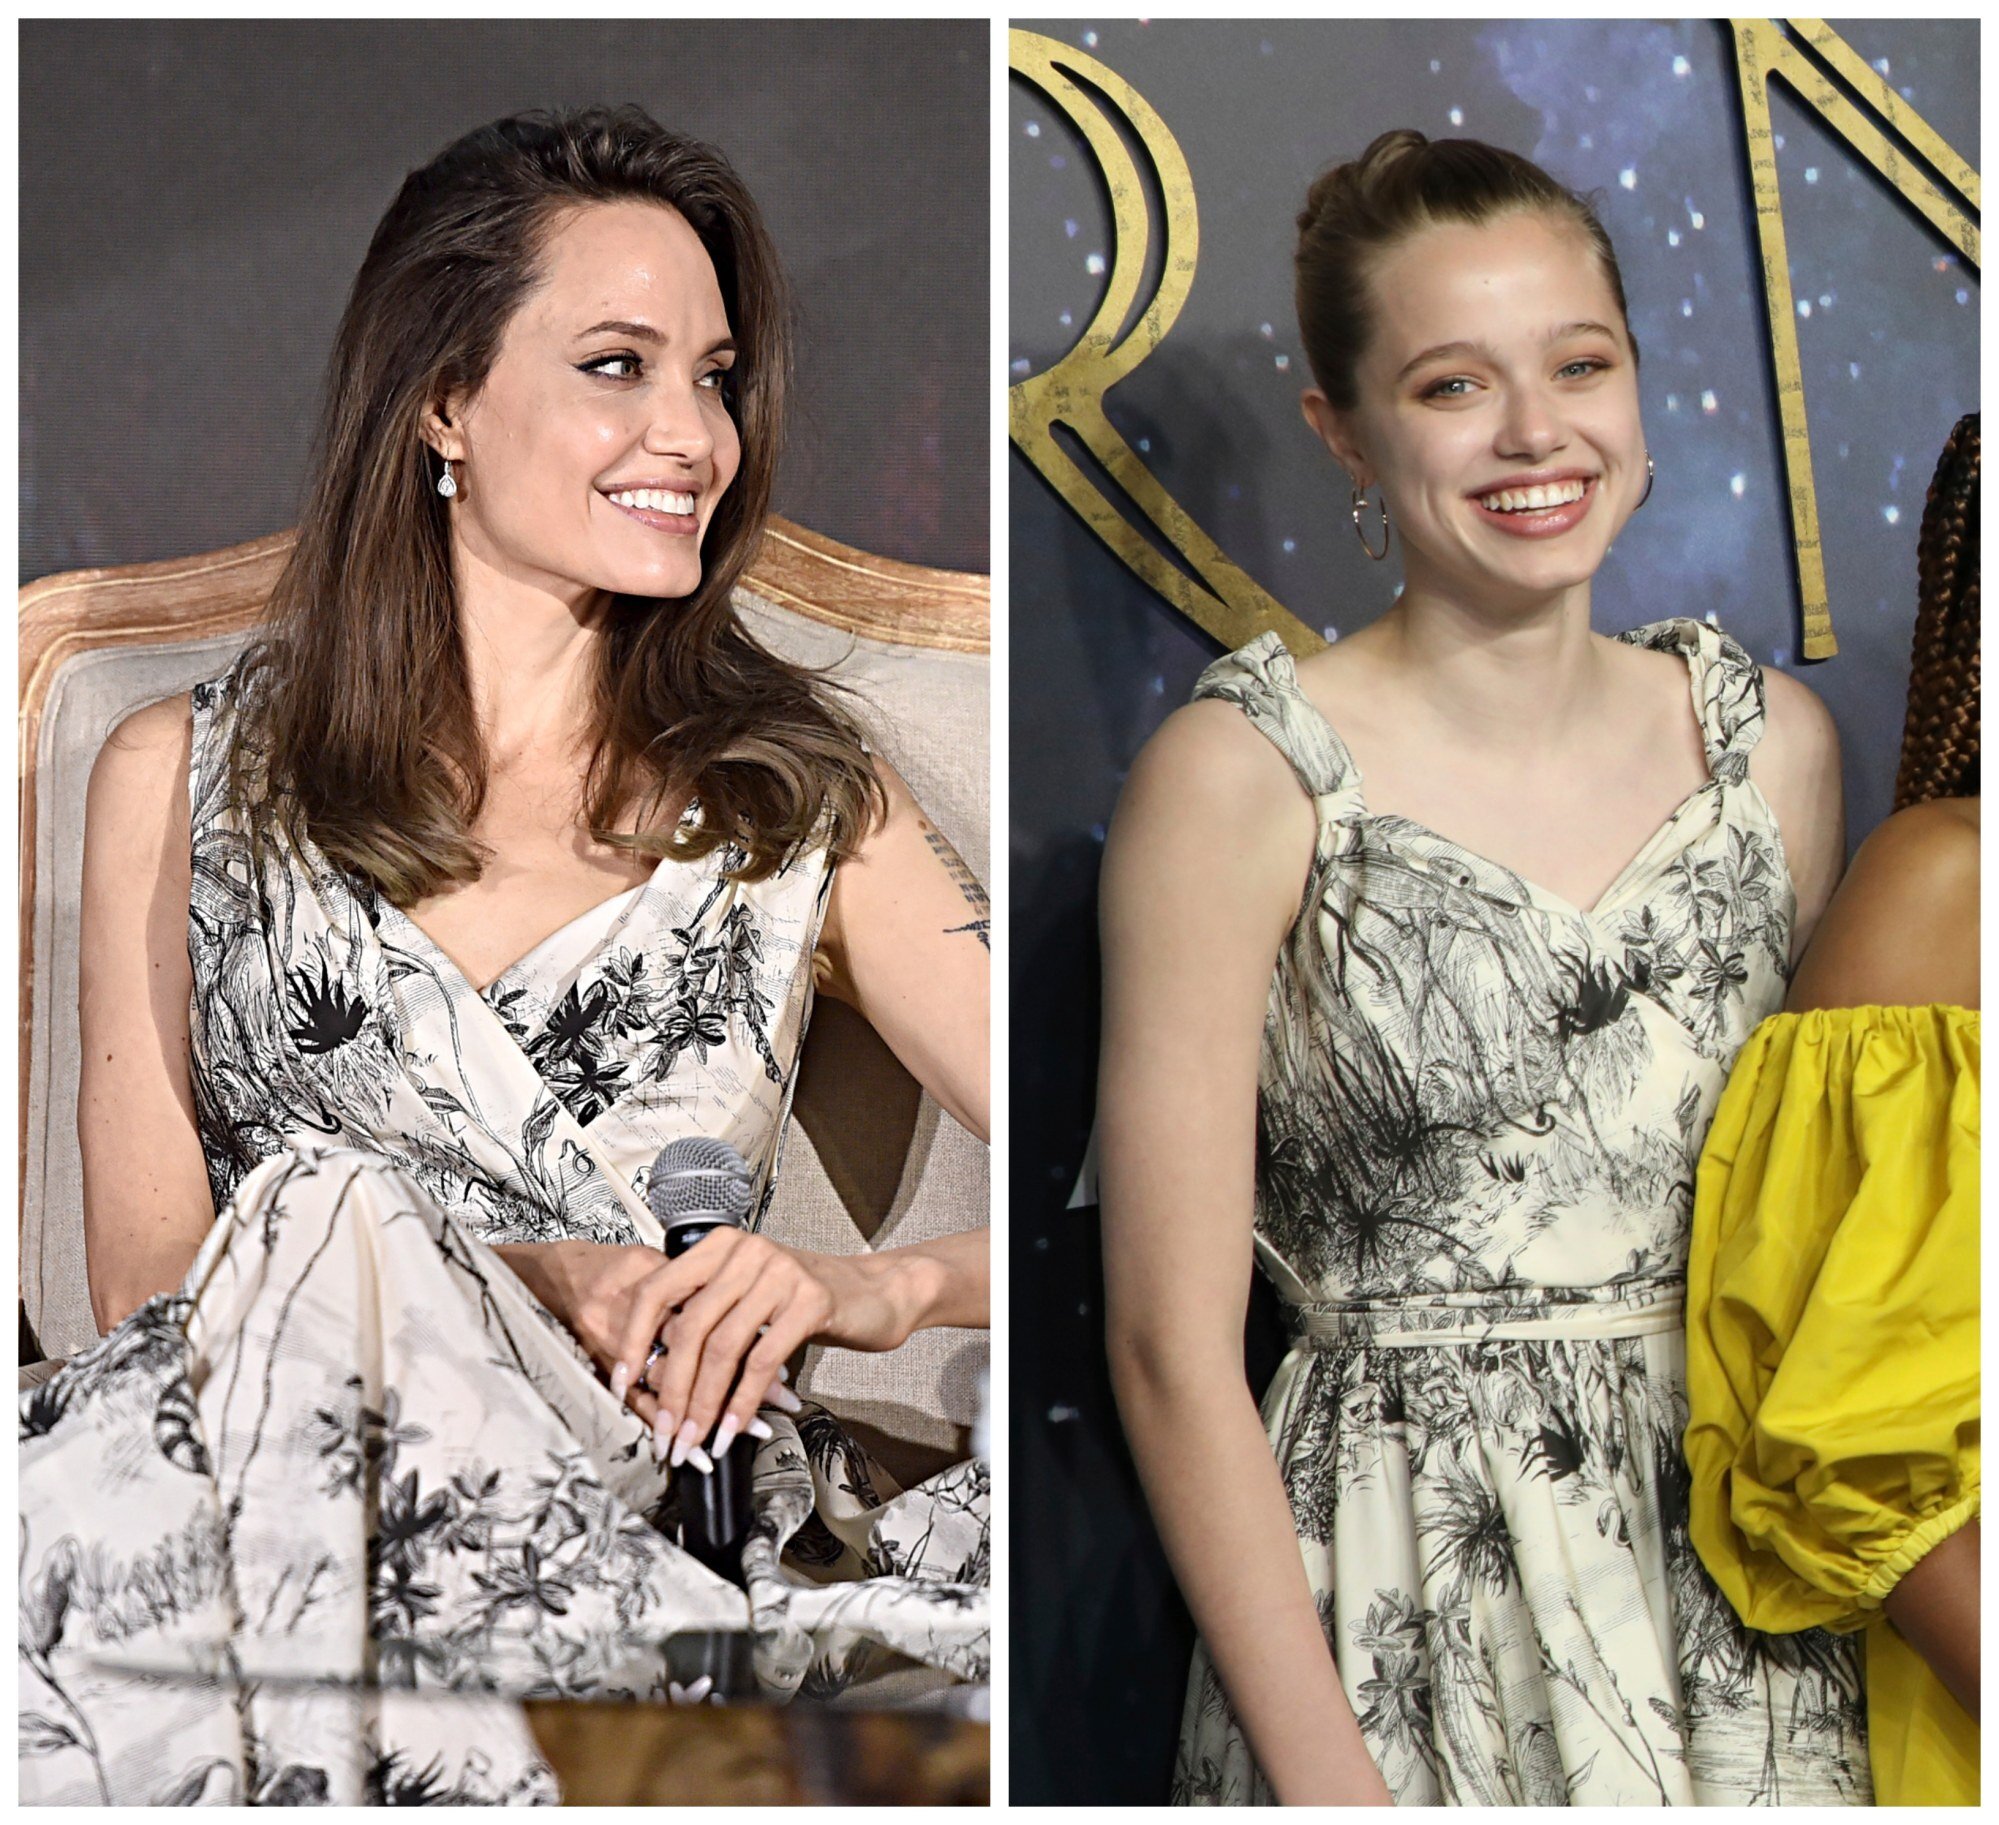 Like mother, like daughter: Shiloh Jolie-Pitt recently wore mother Angelina Jolie’s Dior dress for the London premiere of Eternals. Photo: Getty